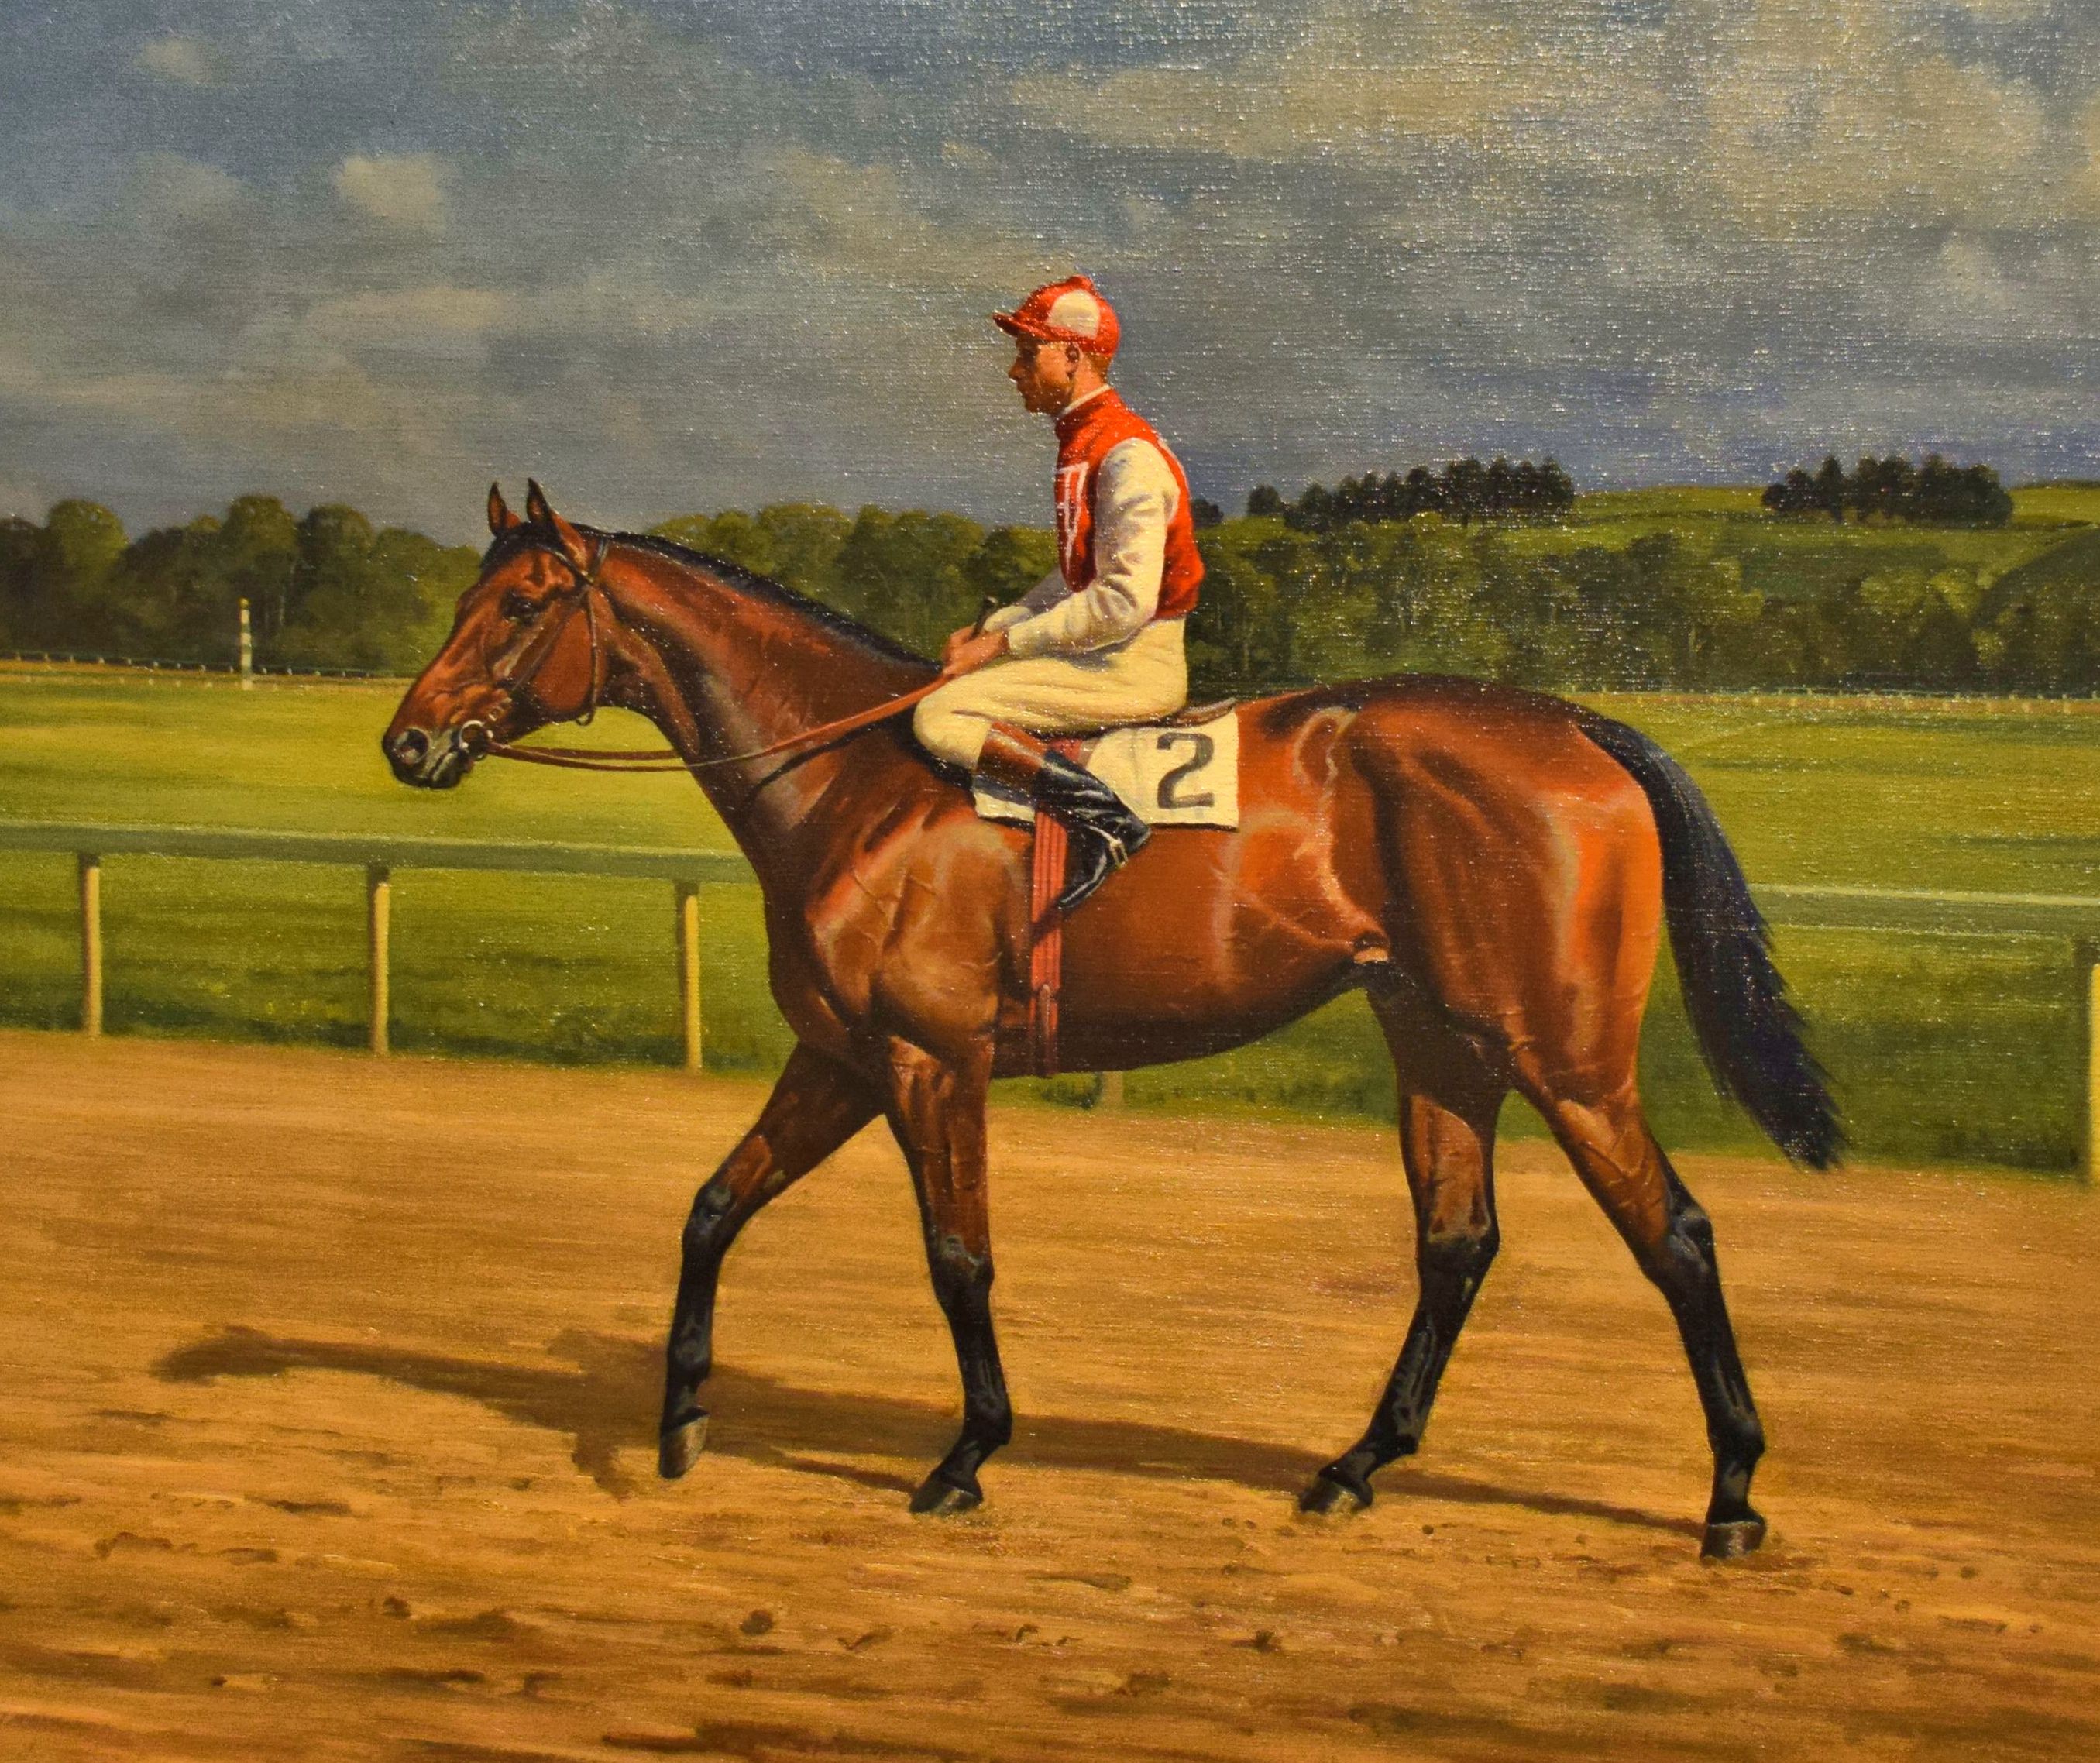 Painting of Seabiscuit by Franklin Brooke Voss, 1937 (Museum Collection)